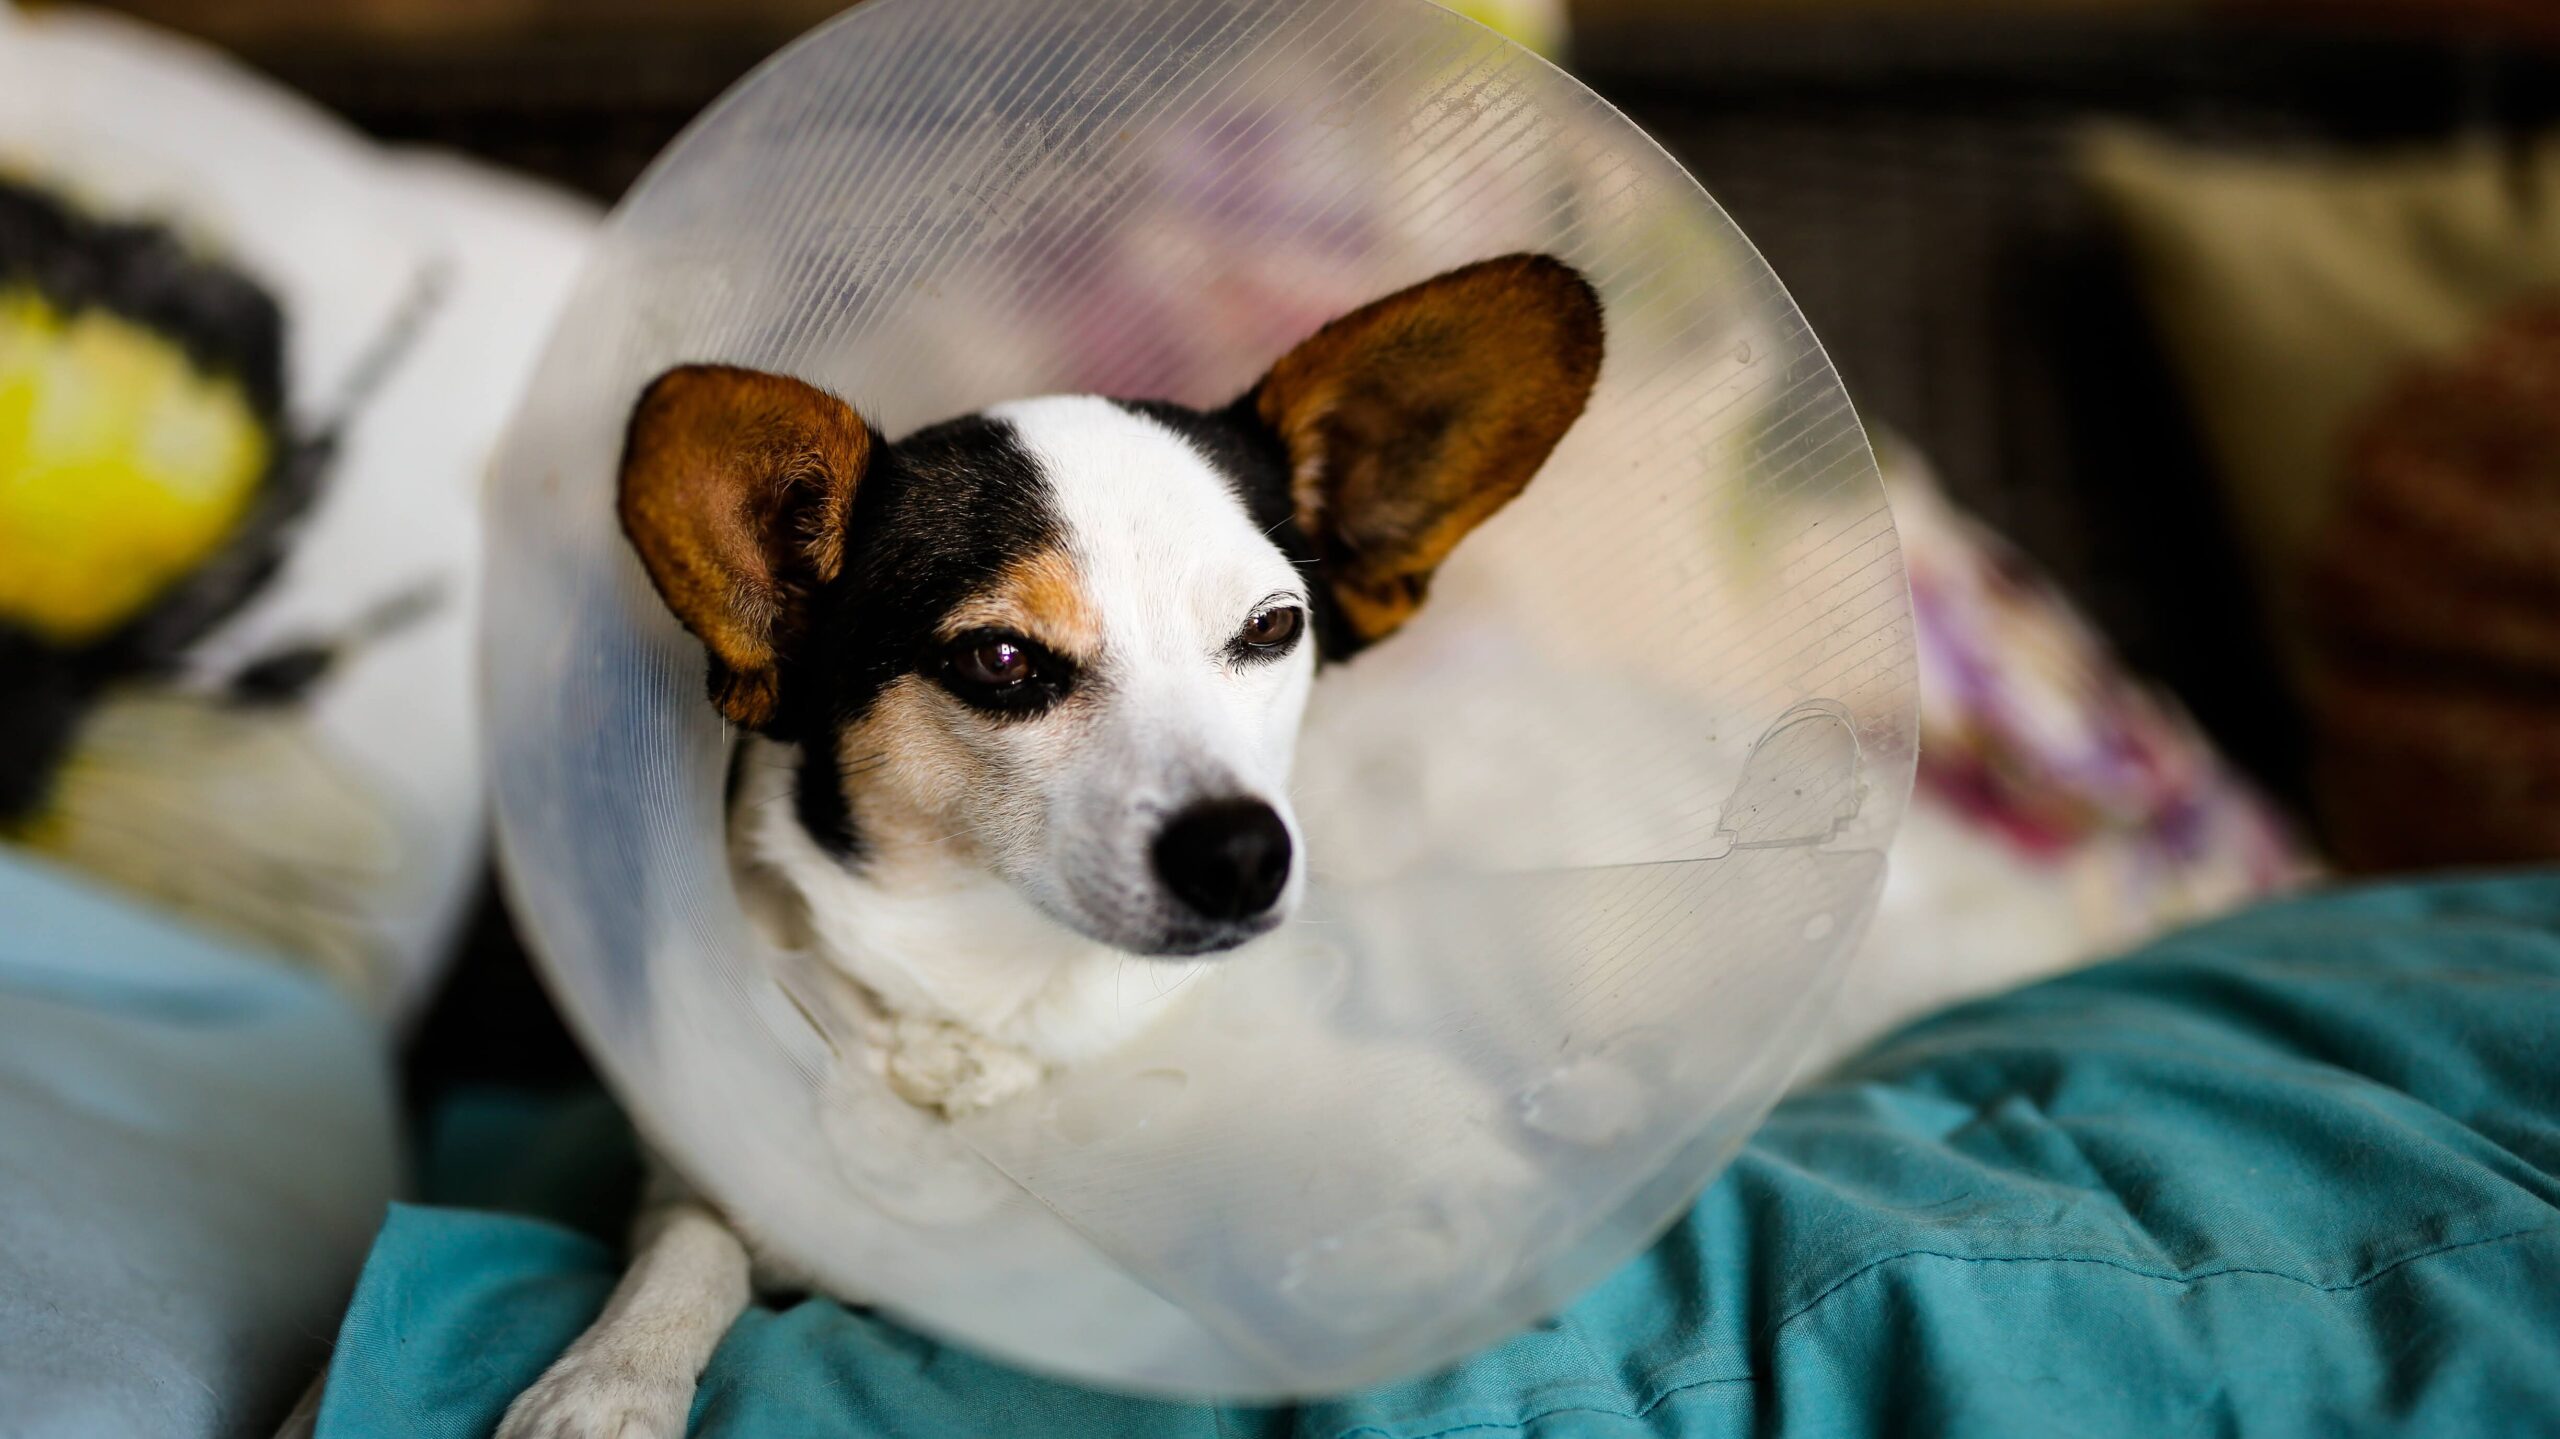 A small Jack Russell cross Papillon puppy wearing a protective cone after having an operation at the vets